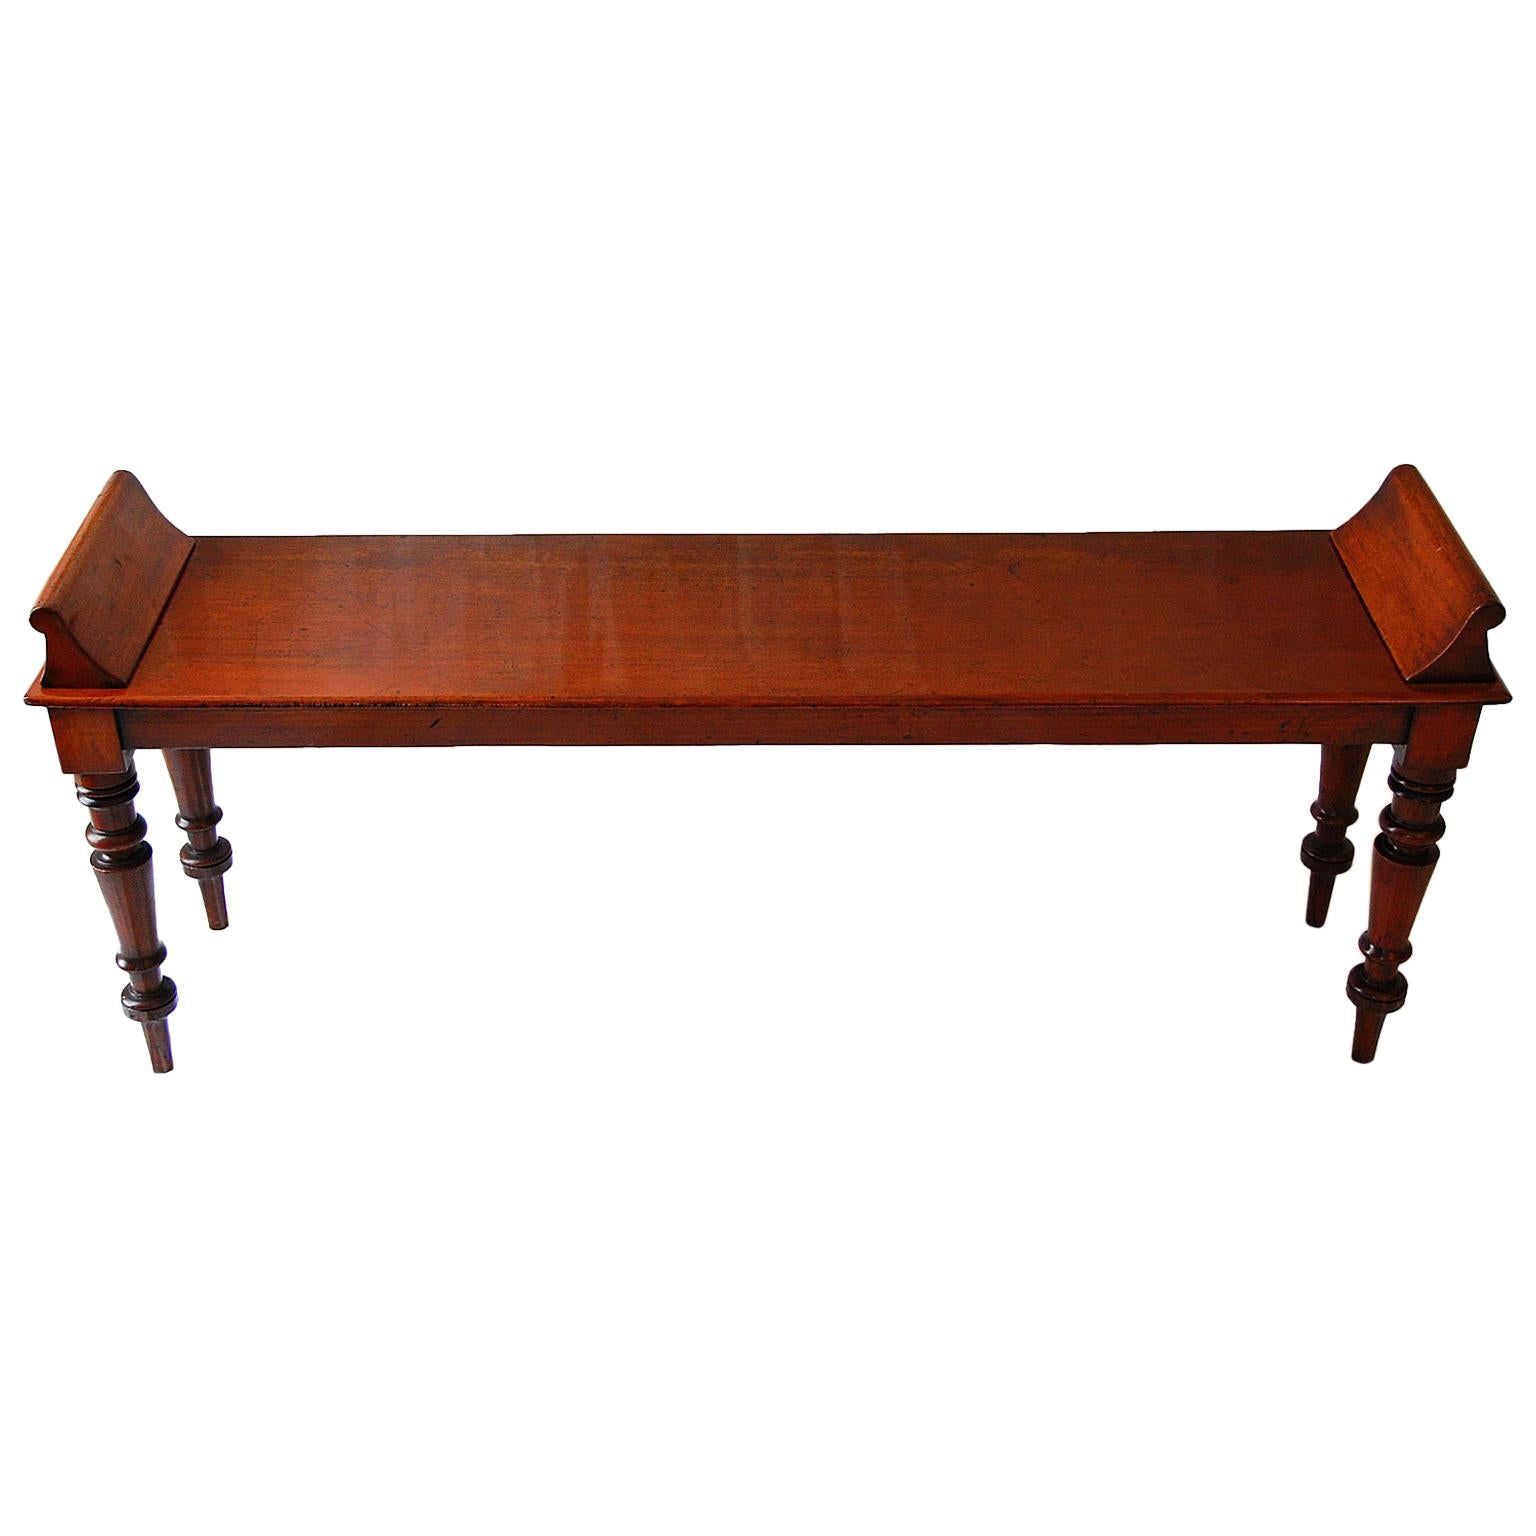 English 19th Century Period Mahogany Hall Bench with Up Swept Ends